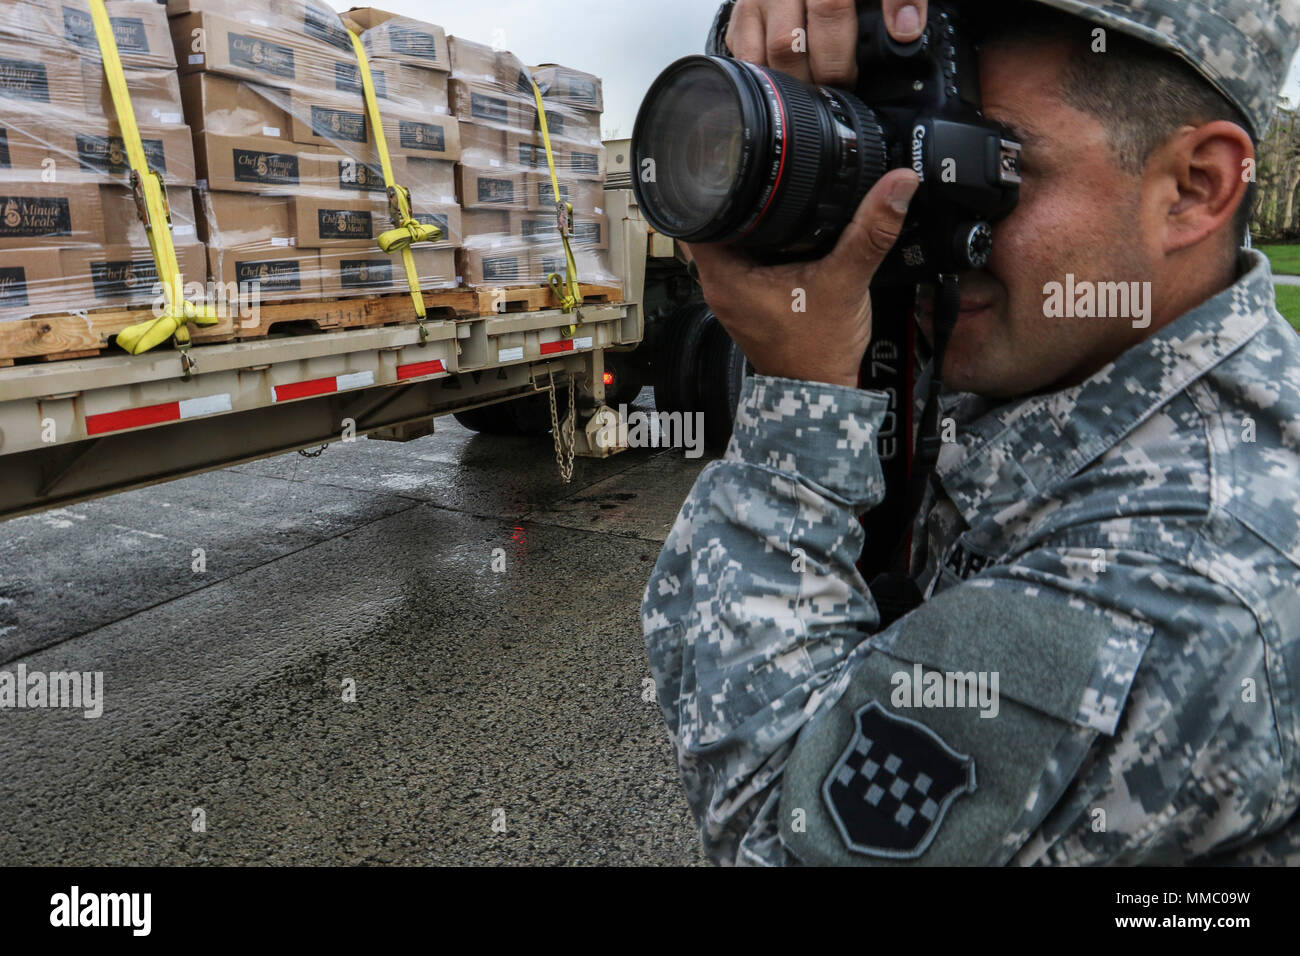 U.S. Army Reserve soldier, Sgt. Edgar Valdez, 220th Public Affairs Detachment, takes photos during a food delivery mission, that is part of Hurricane Maria relief efforts, outside of San Juan, Puerto Rico on Oct. 6, 2017. Valdez is part of a public affairs team that has spent the past several days working with Army Reserve soldiers, under the guidance and request of civil authorities, who are providing much needed supplies and resources to all of Puerto Rico. We're working hard to do our part to keep America informed. (U.S. Army Reserve photo by Staff Sgt. Felix R. Fimbres) Stock Photo